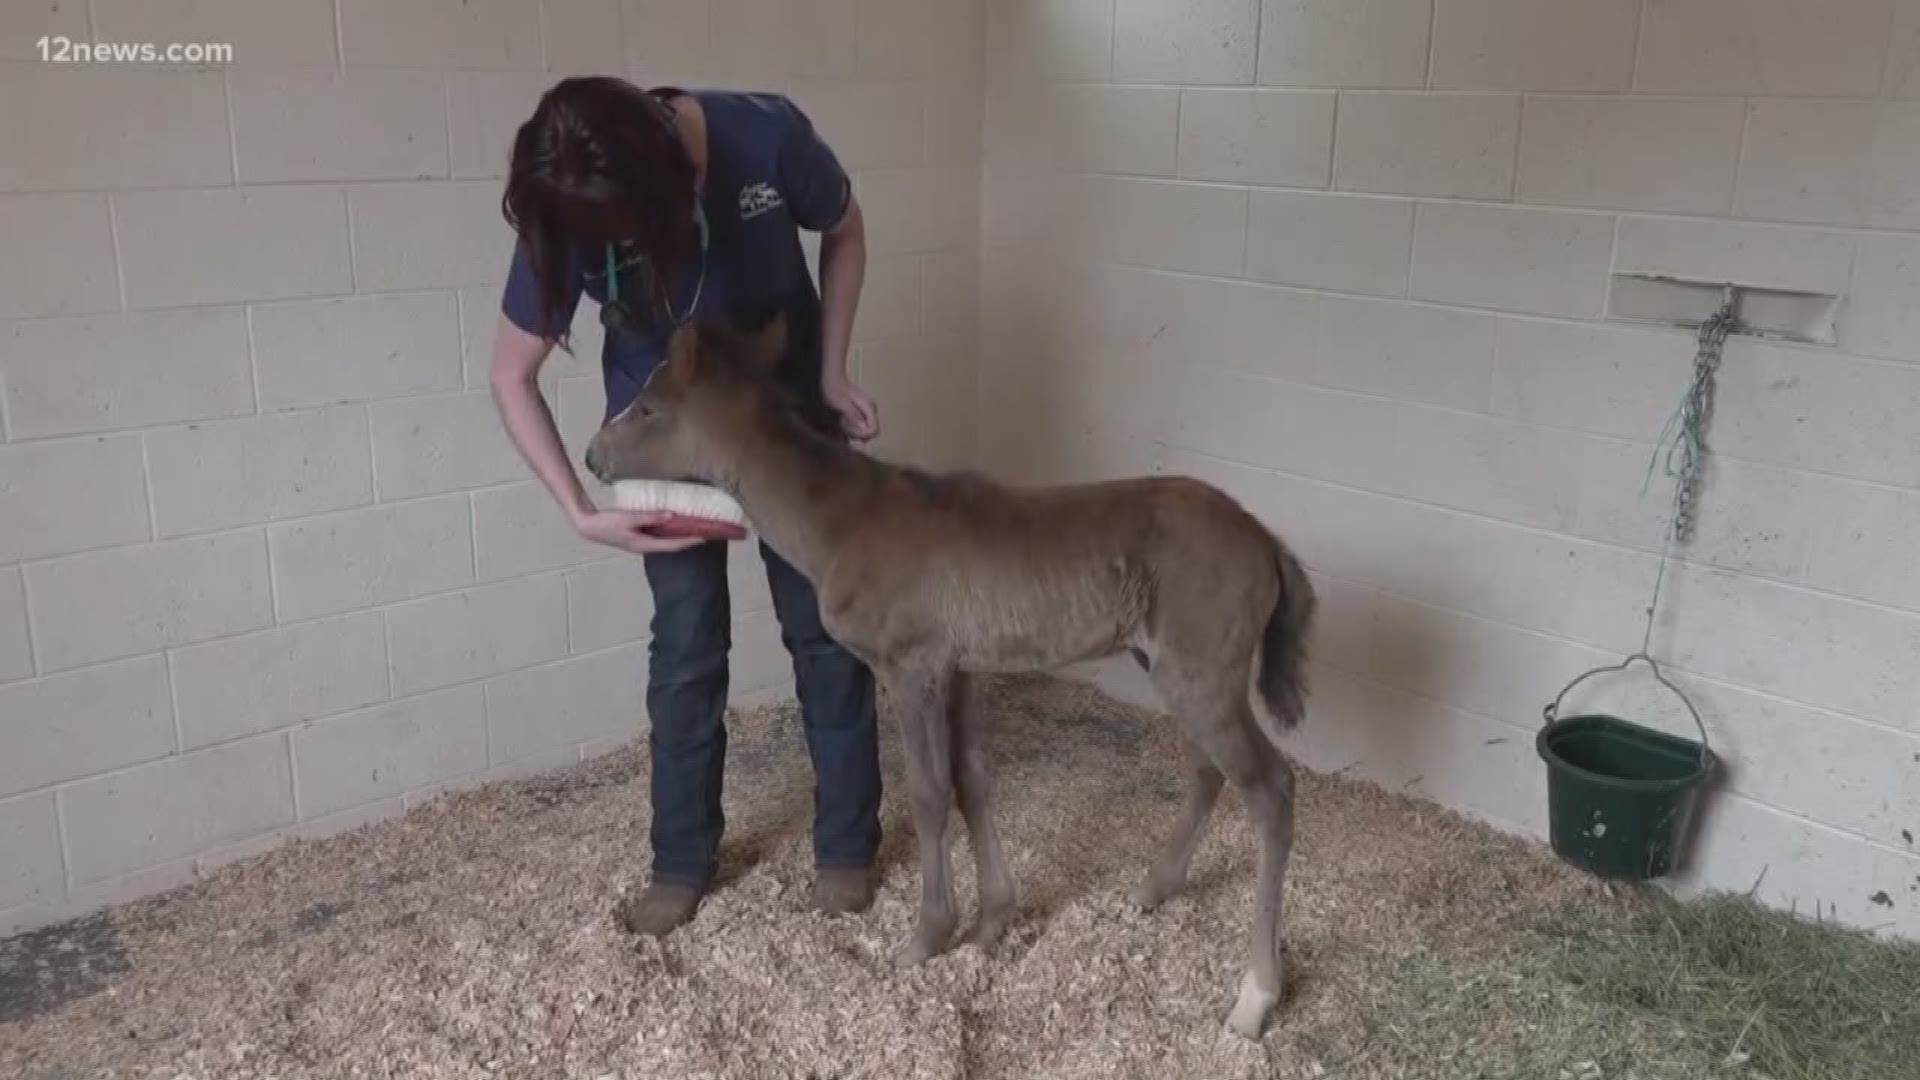 A 3-week-old foal is receiving care to help her recover from the after-effects of starvation and dehydration. She is the sole survivor of a wild horse die-off discovered last week.